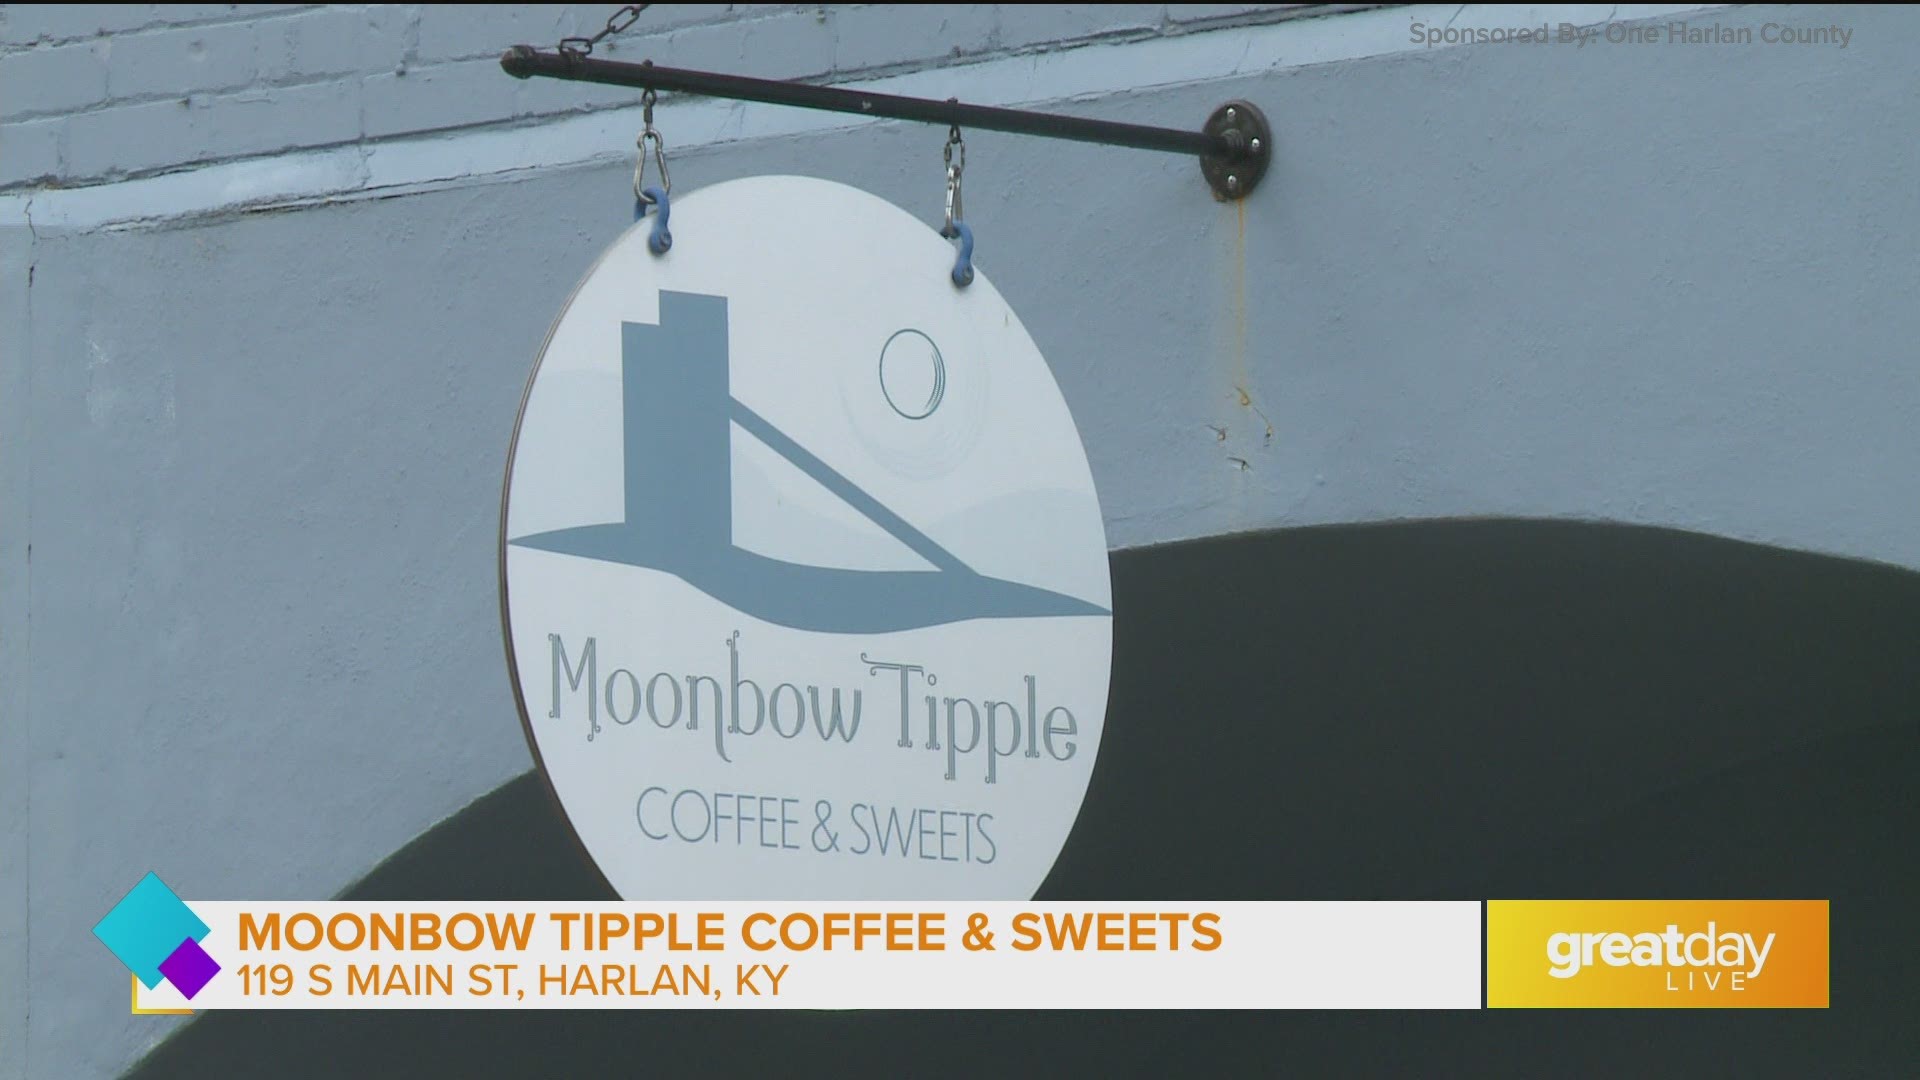 Moonbow Tipple Coffee & Sweets is located at 119 S Main St. in Harlan, KY. For more information, visit kentuckymoonbow.com.